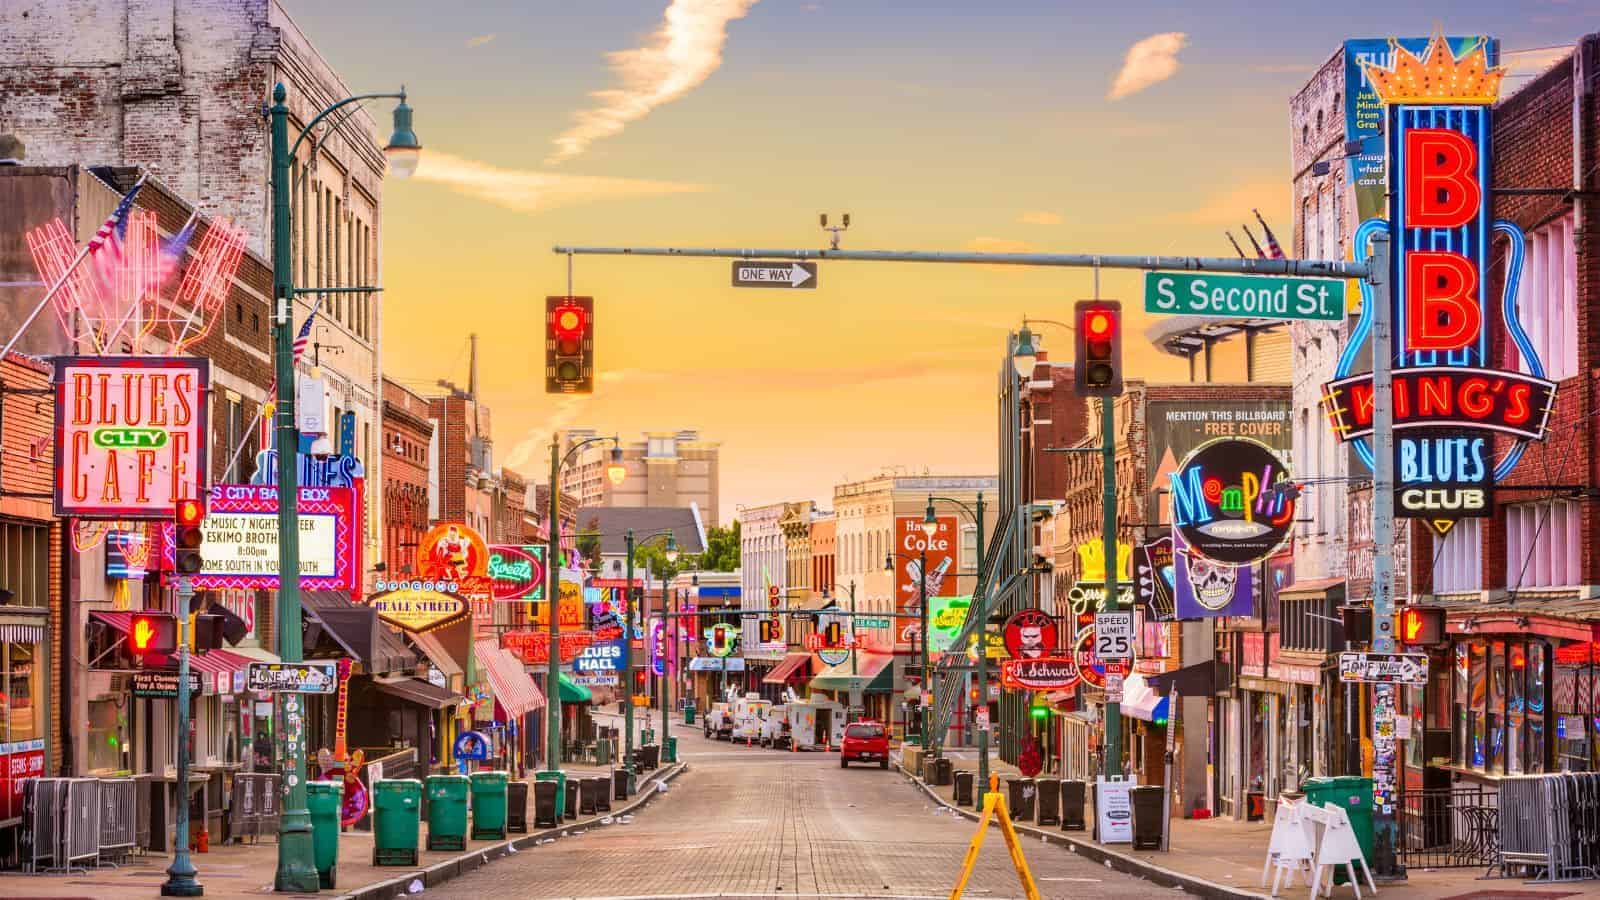 <p>Memphis is famous for its Elvis Presley associations but is an otherwise disappointing tourist destination. The entire city is considered dangerous, with high crime and poverty rates. There are also prominent cases of gang and gun violence in Memphis, so you’ll likely feel on guard wherever you go if you visit.</p>